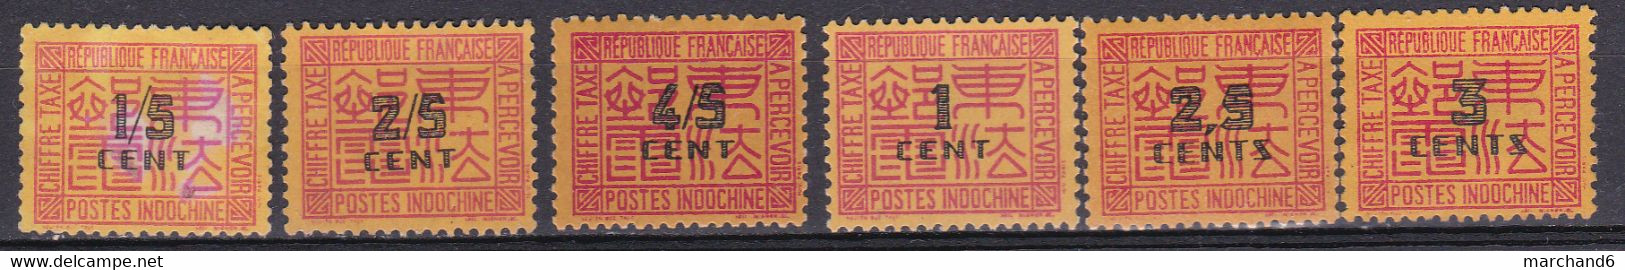 Indochine Timbre Taxe 1931-41 N°58-67-74+57-58-59-60-62-63 Oblitéré Neuf** Neuf* Sans Gomme 2scan - Postage Due